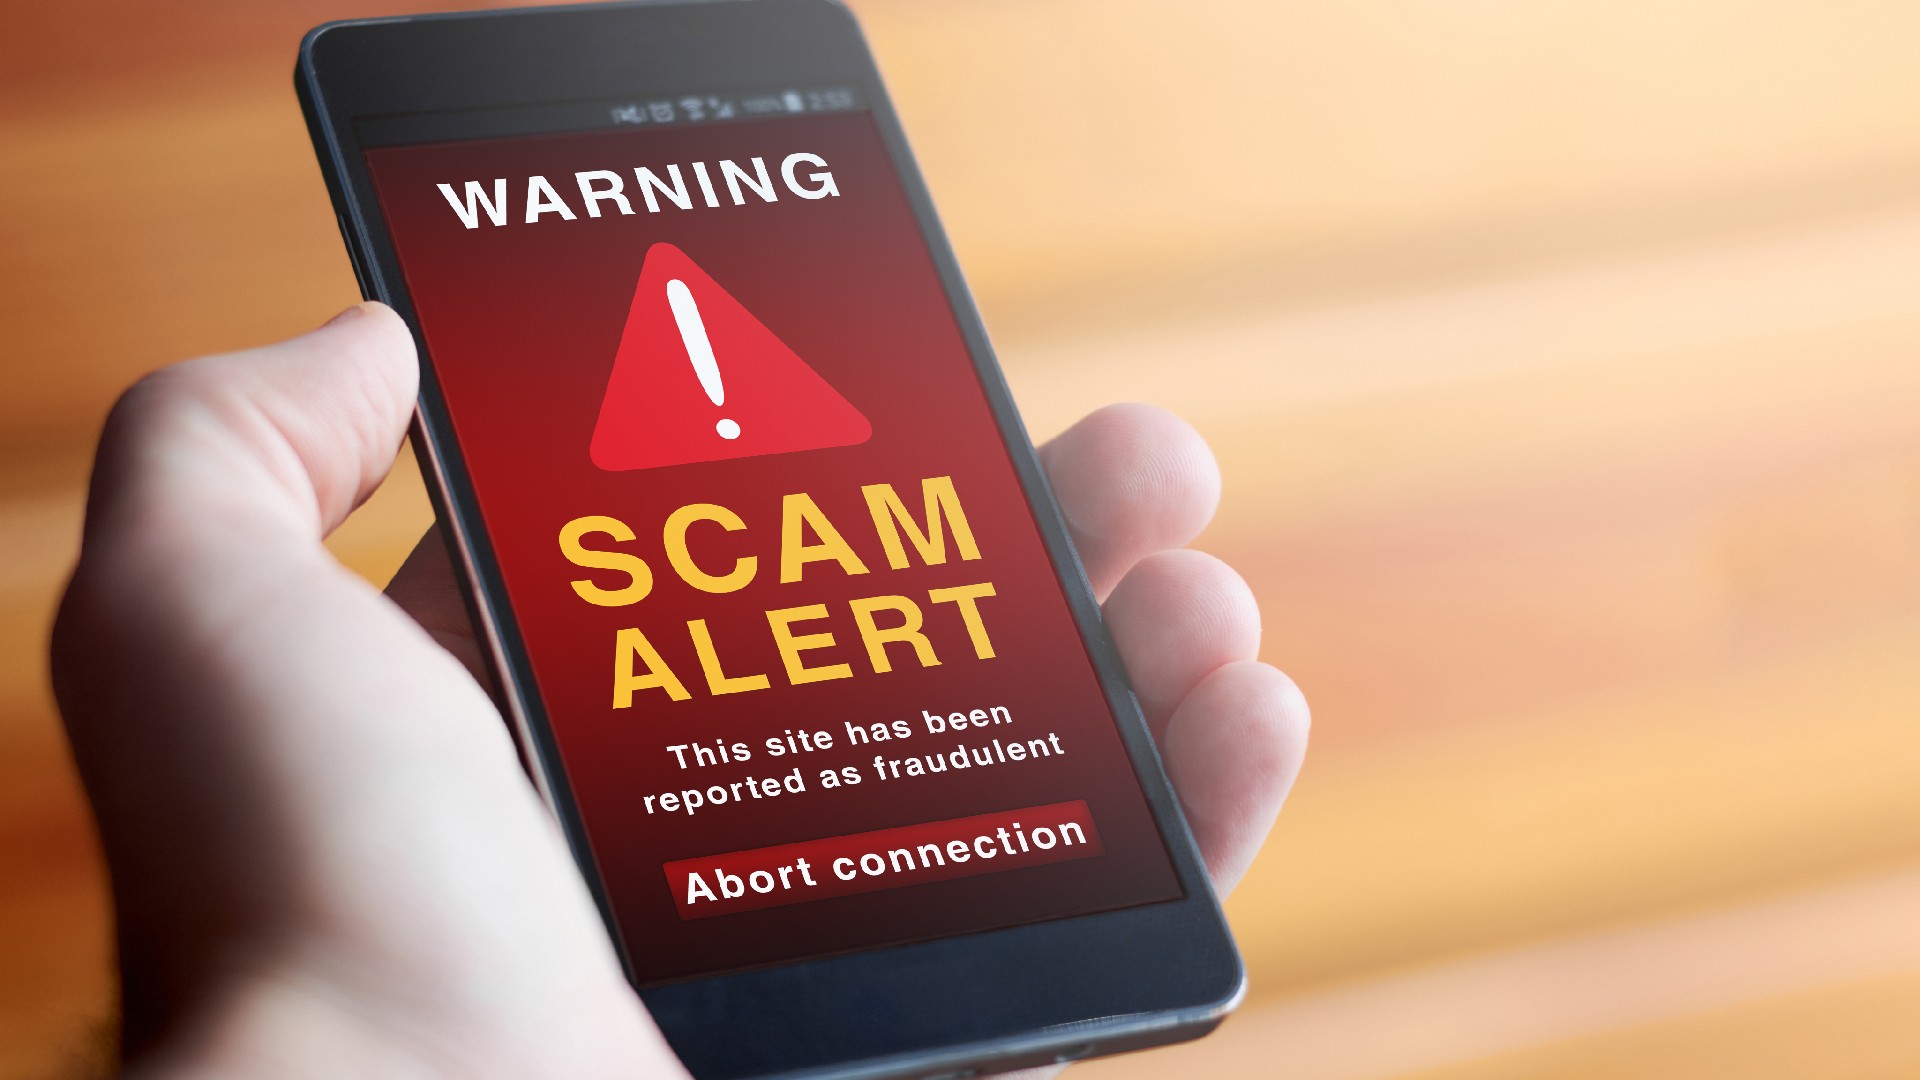 A scam alert displays on a mobile phone